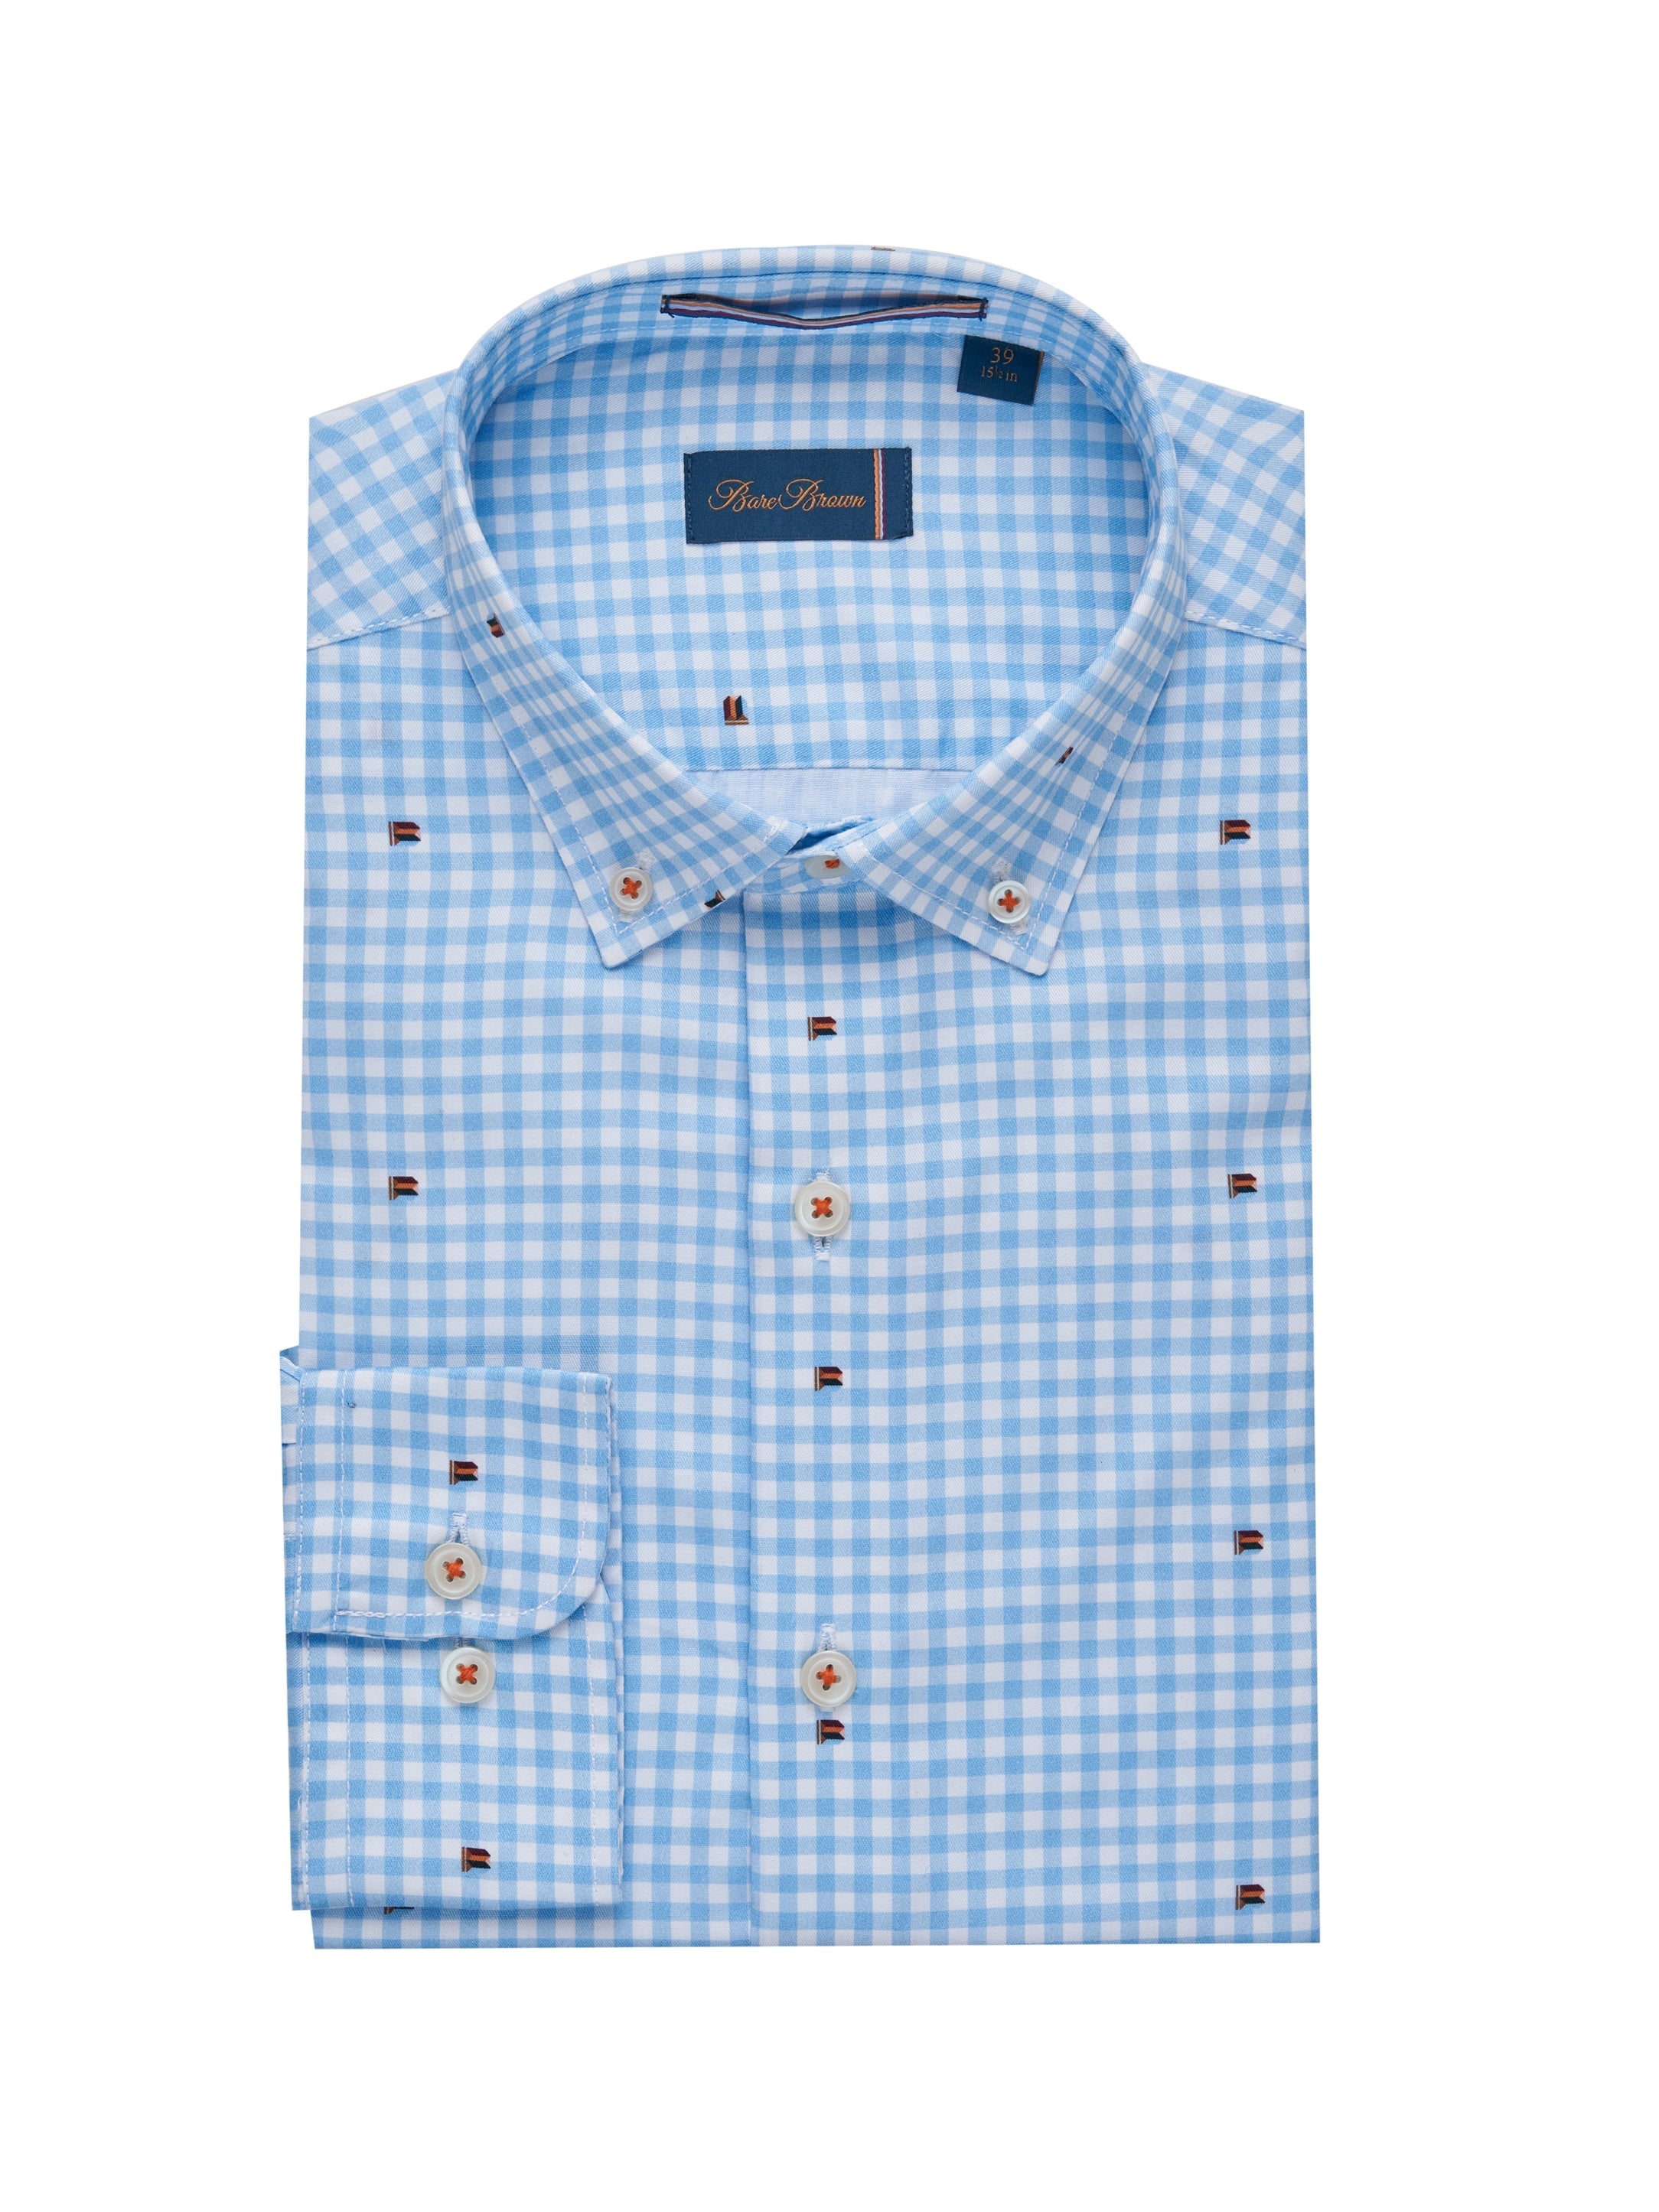 Bare Brown Cotton Gingham Check Shirt, Slim Fit with Full Sleeves - Light Blue